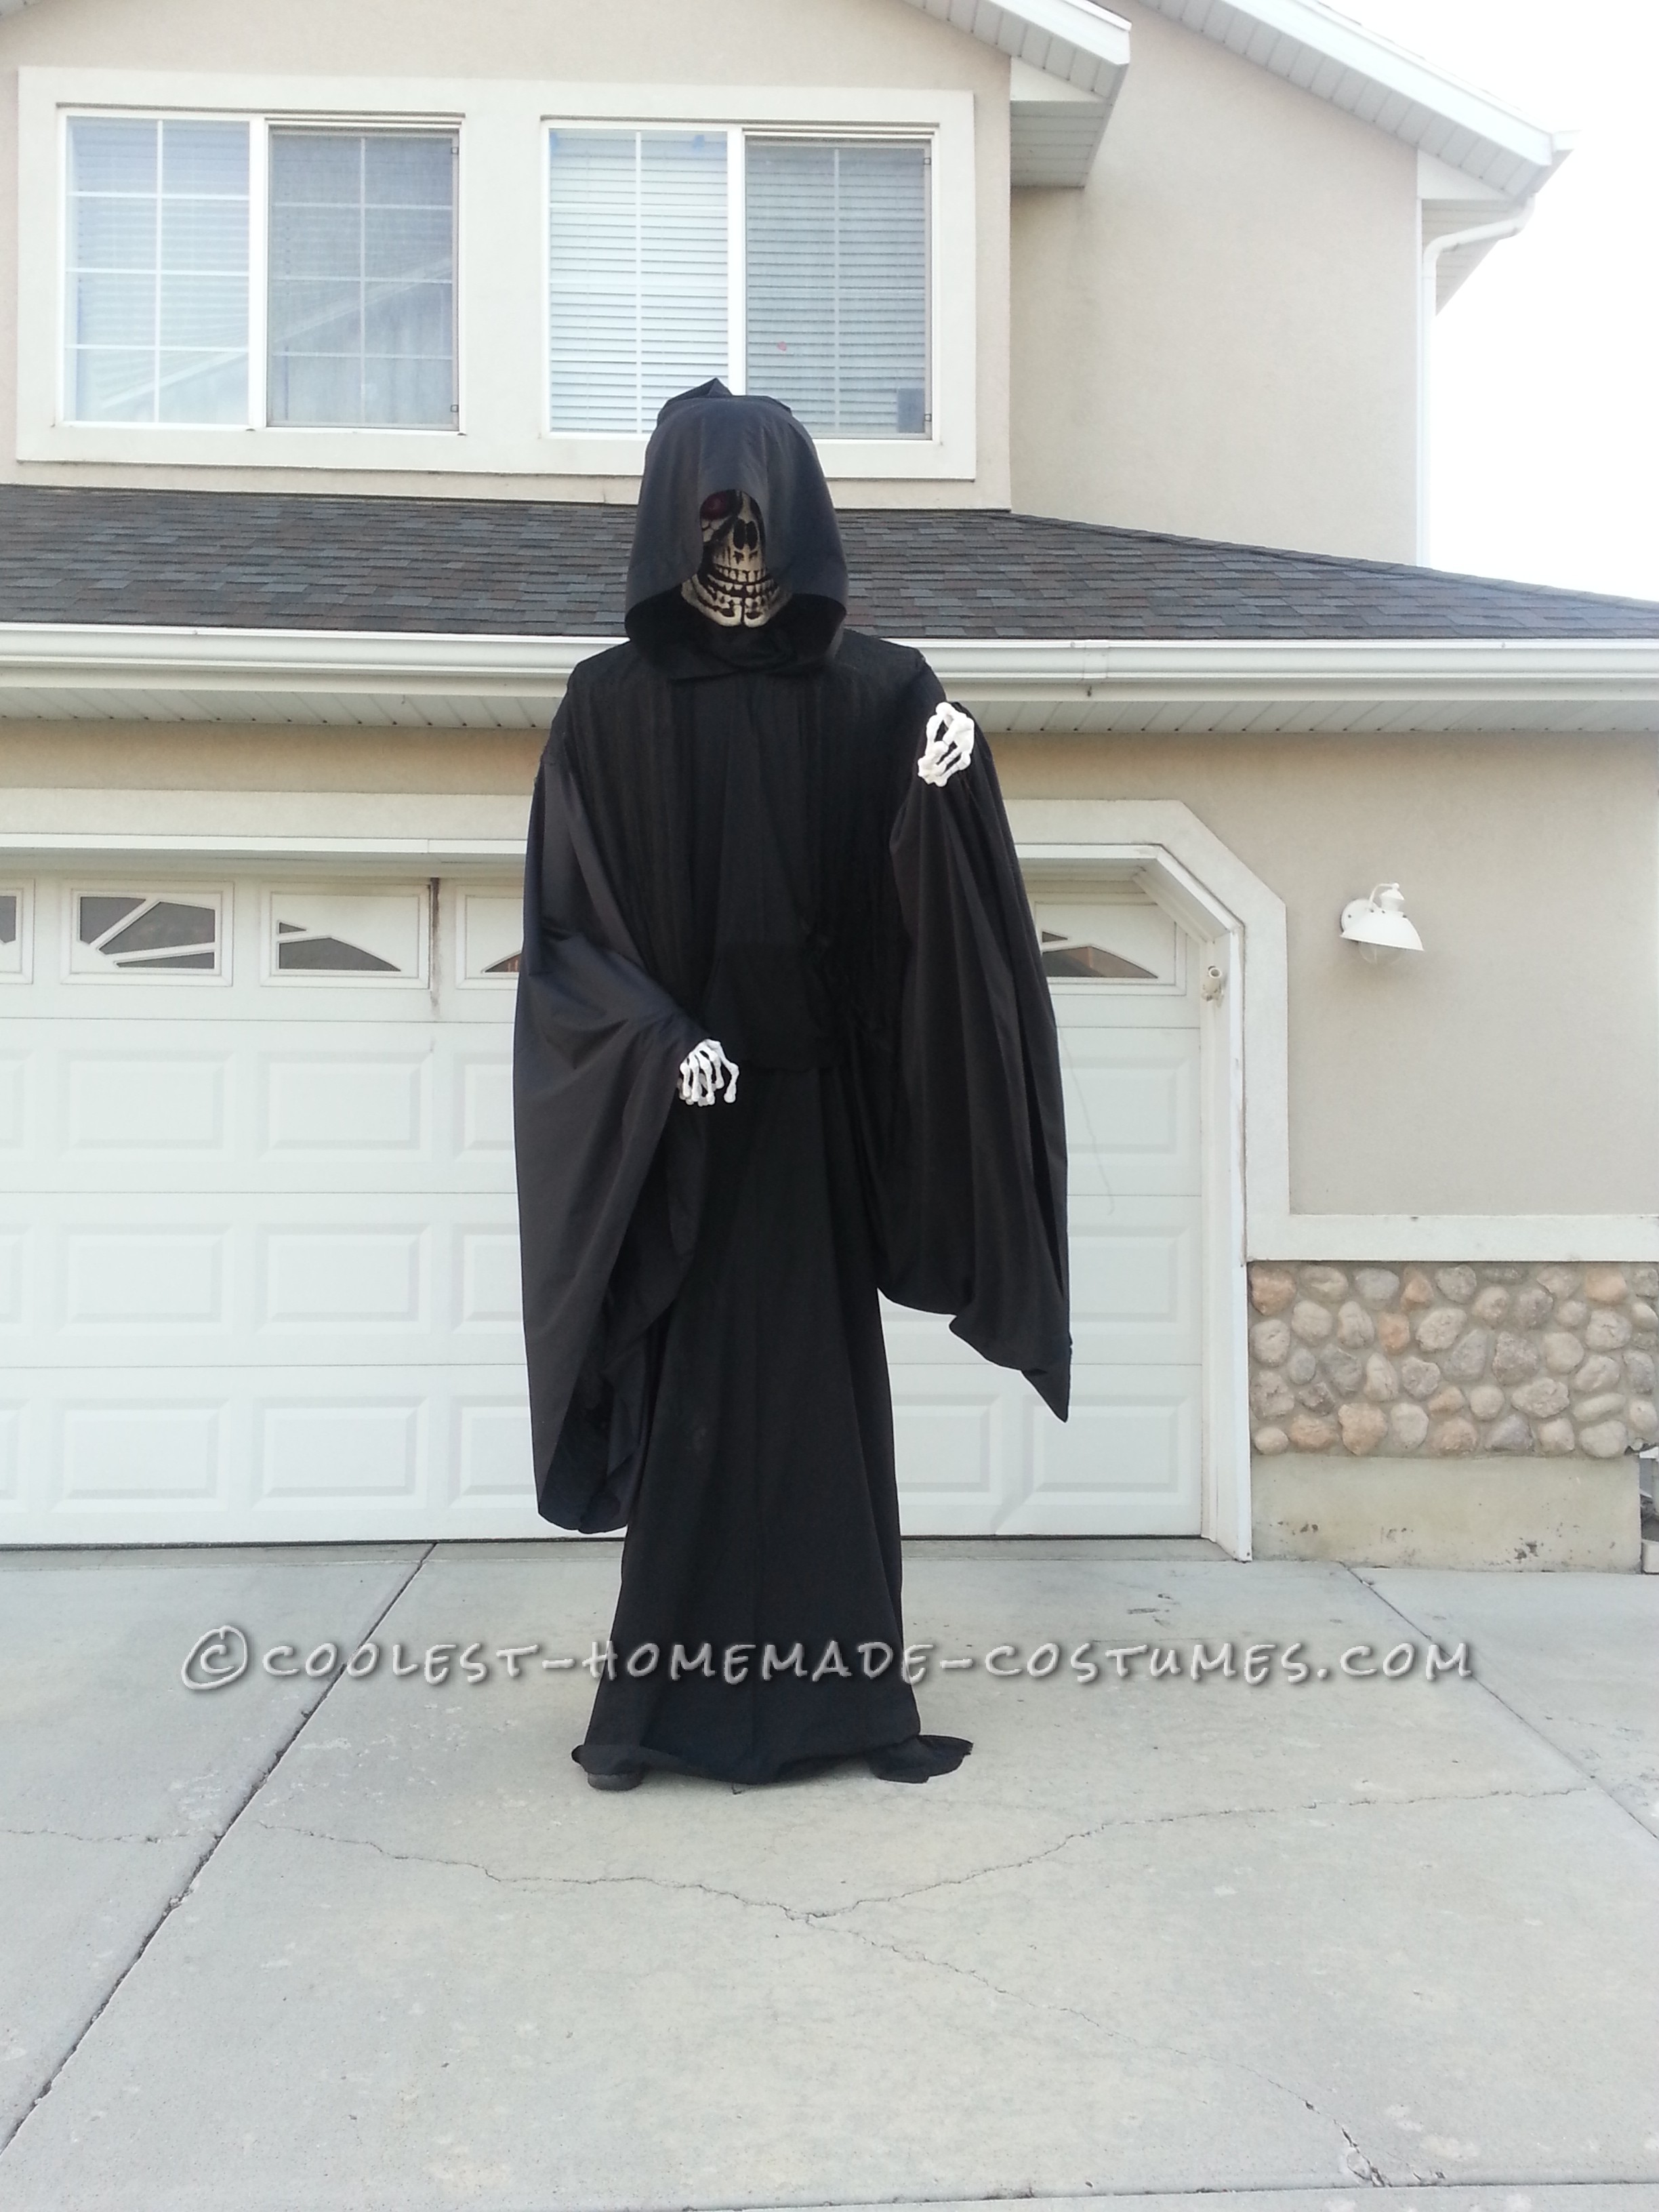 Awesome Homemade Ten Foot Reaper Costume